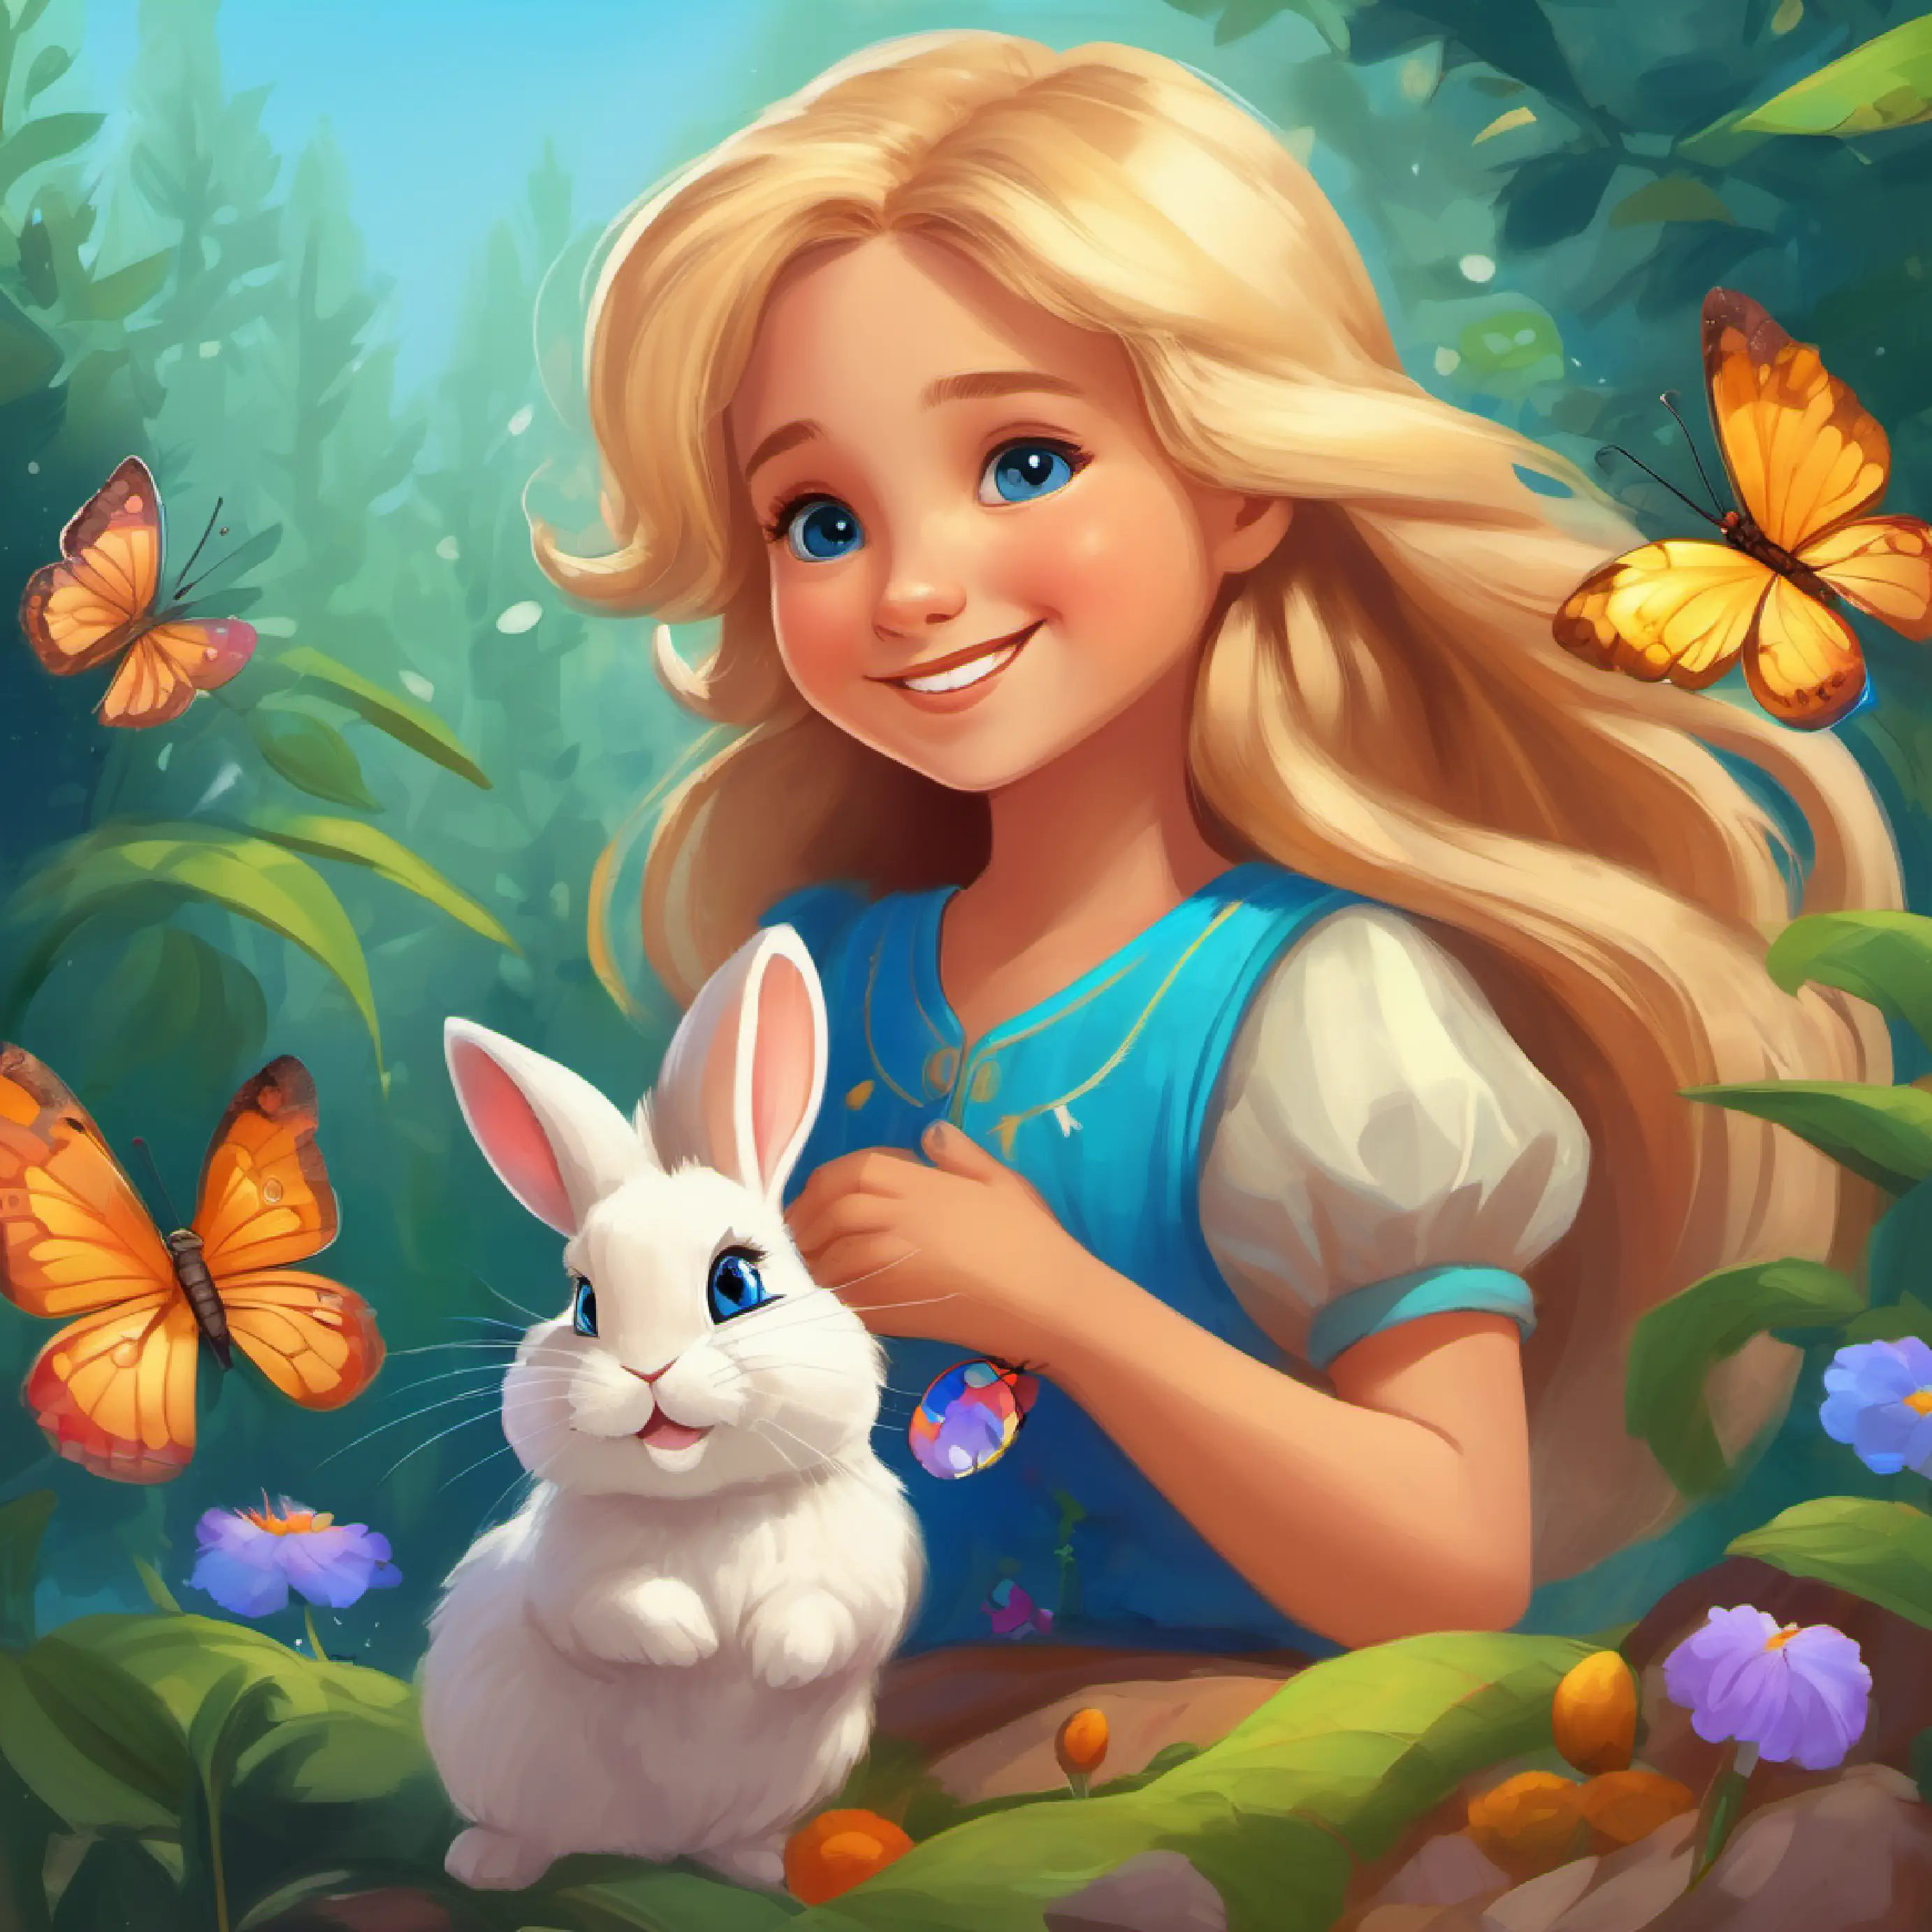 Young princess with a bright smile and long golden hair, blue eyes meets sad rabbit Small, fluffy rabbit, brown fur, big teary eyes and decides to help find his friend, Tiny caterpillar, later a colorful butterfly, cheerful the caterpillar.